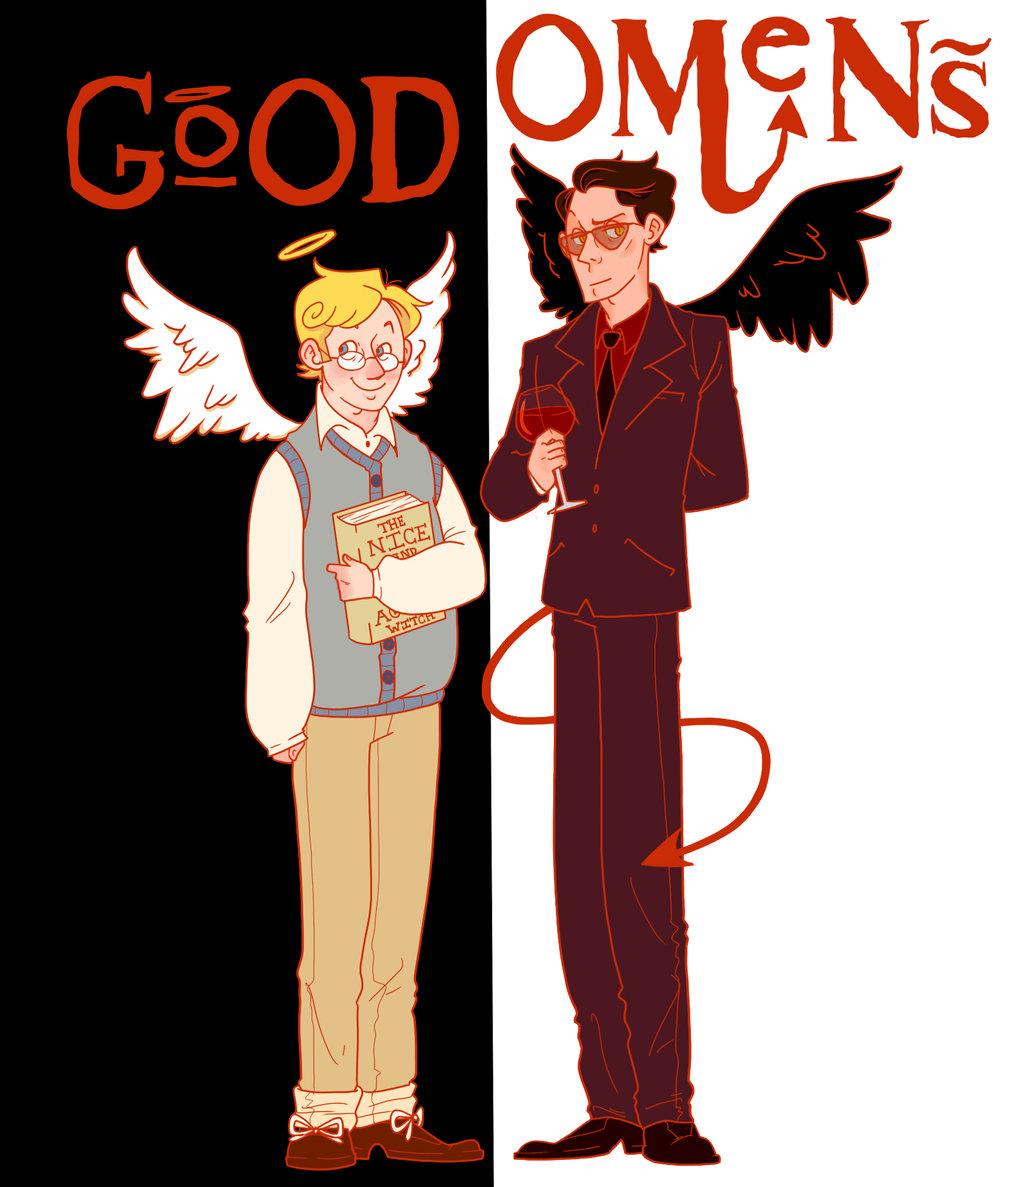 Quotes about Good Omens (37 quotes)